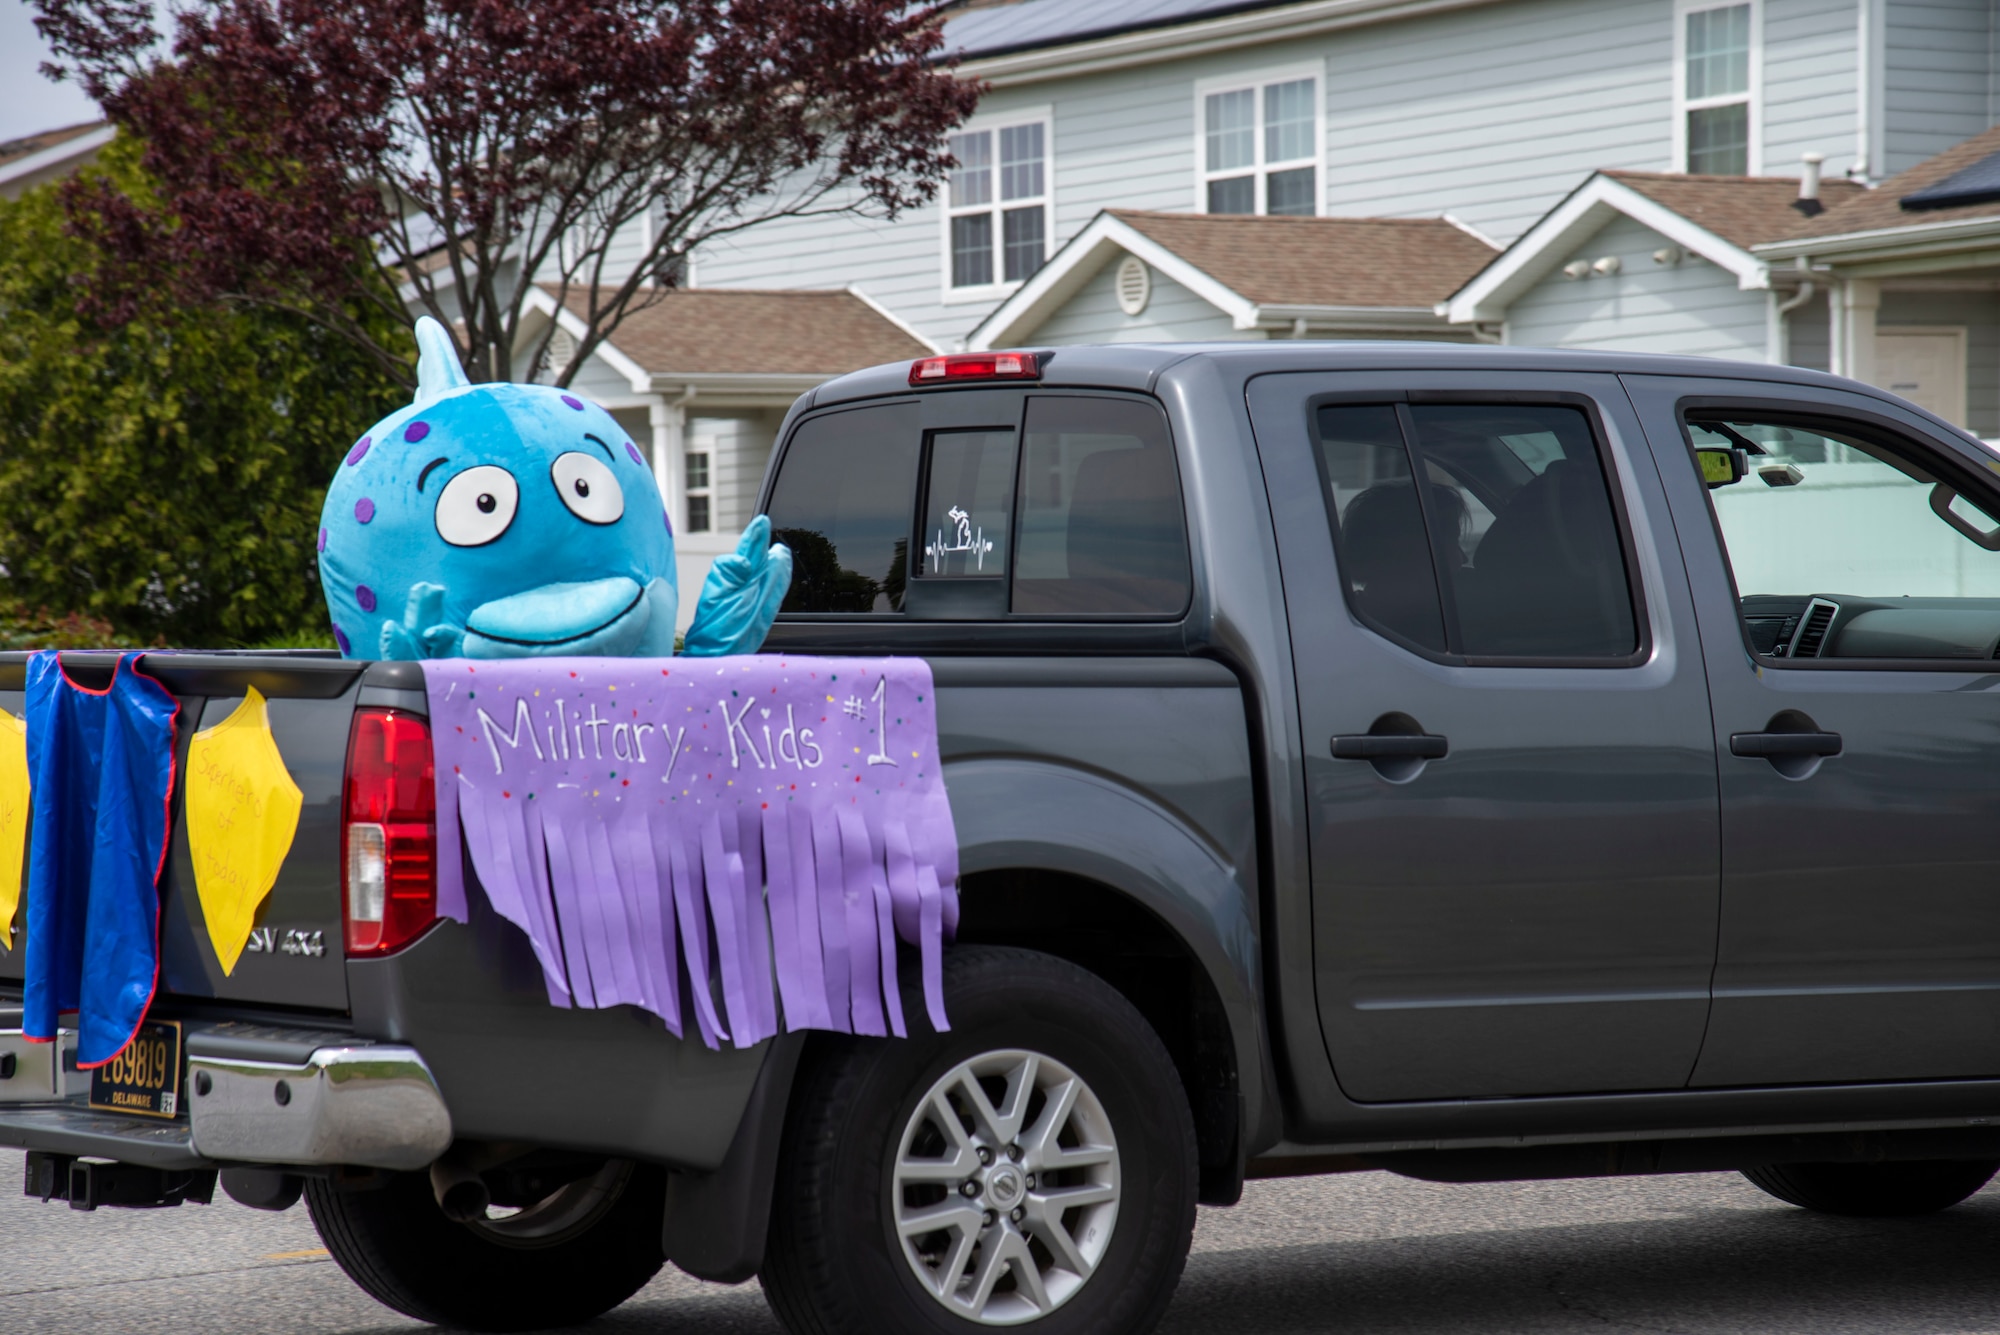 Dover Air Force Base school district mascot, Bubbles, waves to families during a "Teachers' Parade" April 28, 2020, at Dover Air Force Base, Delaware. Despite the closure of Delaware school due to COVID-19, Teachers from Welch Elementary and Dover Air Base Middle School found time to celebrate Month of the Military Child which dedicates the month of April to honoring the sacrifices made by military families. (U.S. Air Force photo by Airman 1st Class Jonathan Harding).